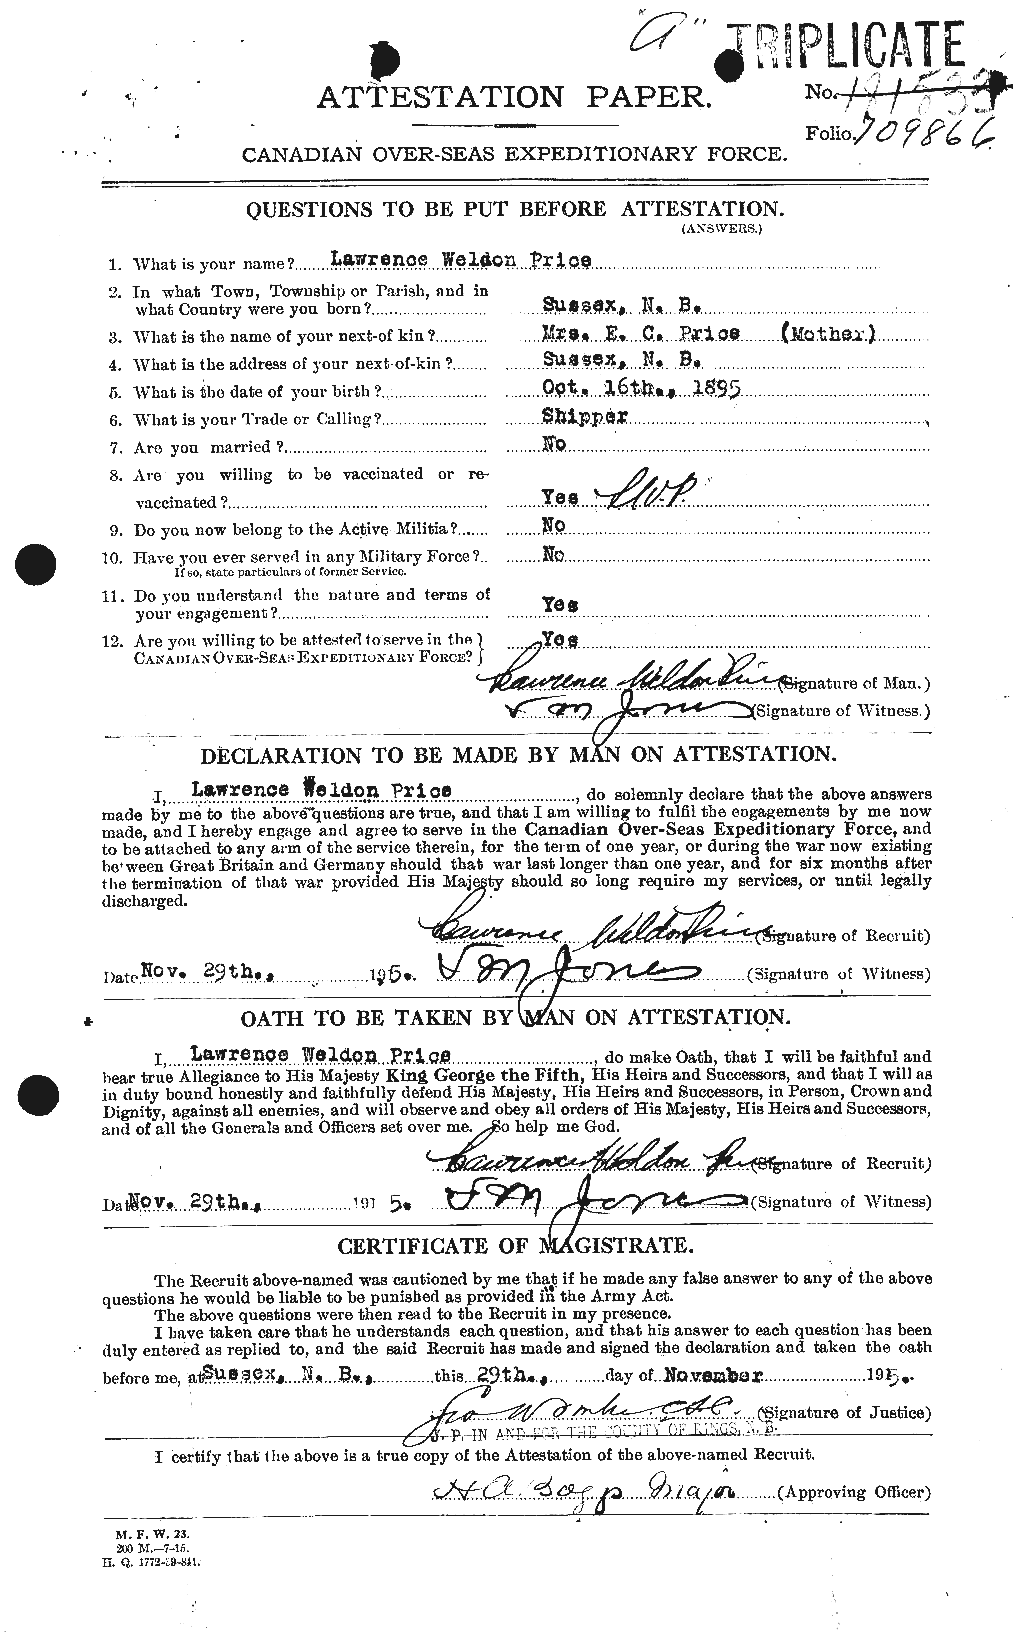 Personnel Records of the First World War - CEF 587272a